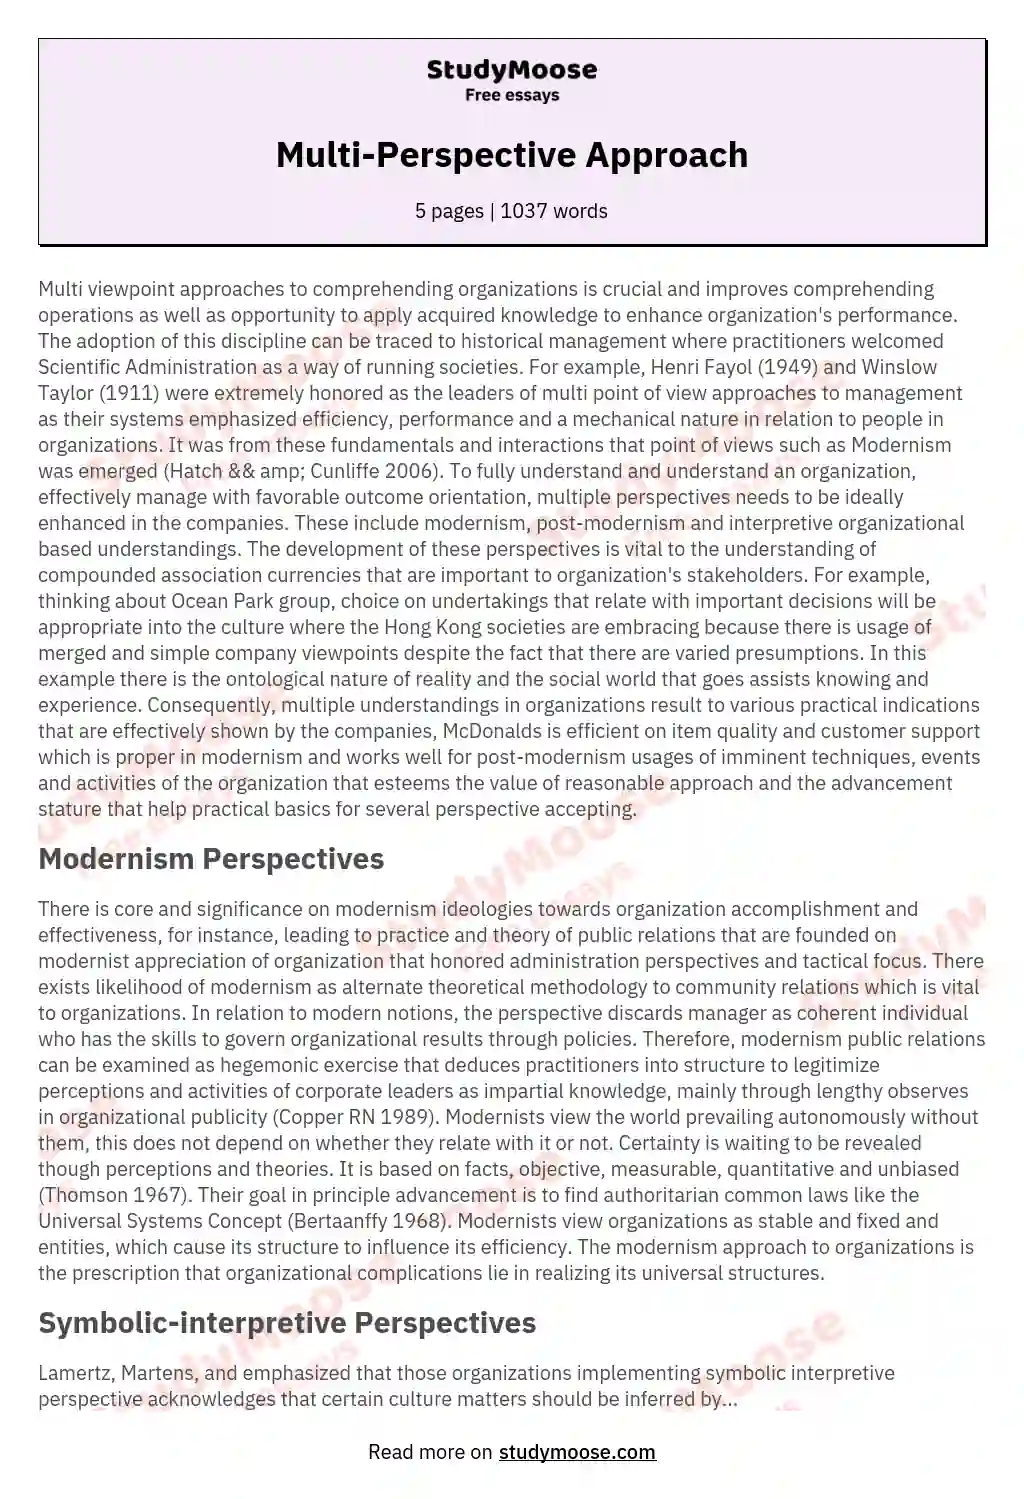 Multi-Perspective Approach essay